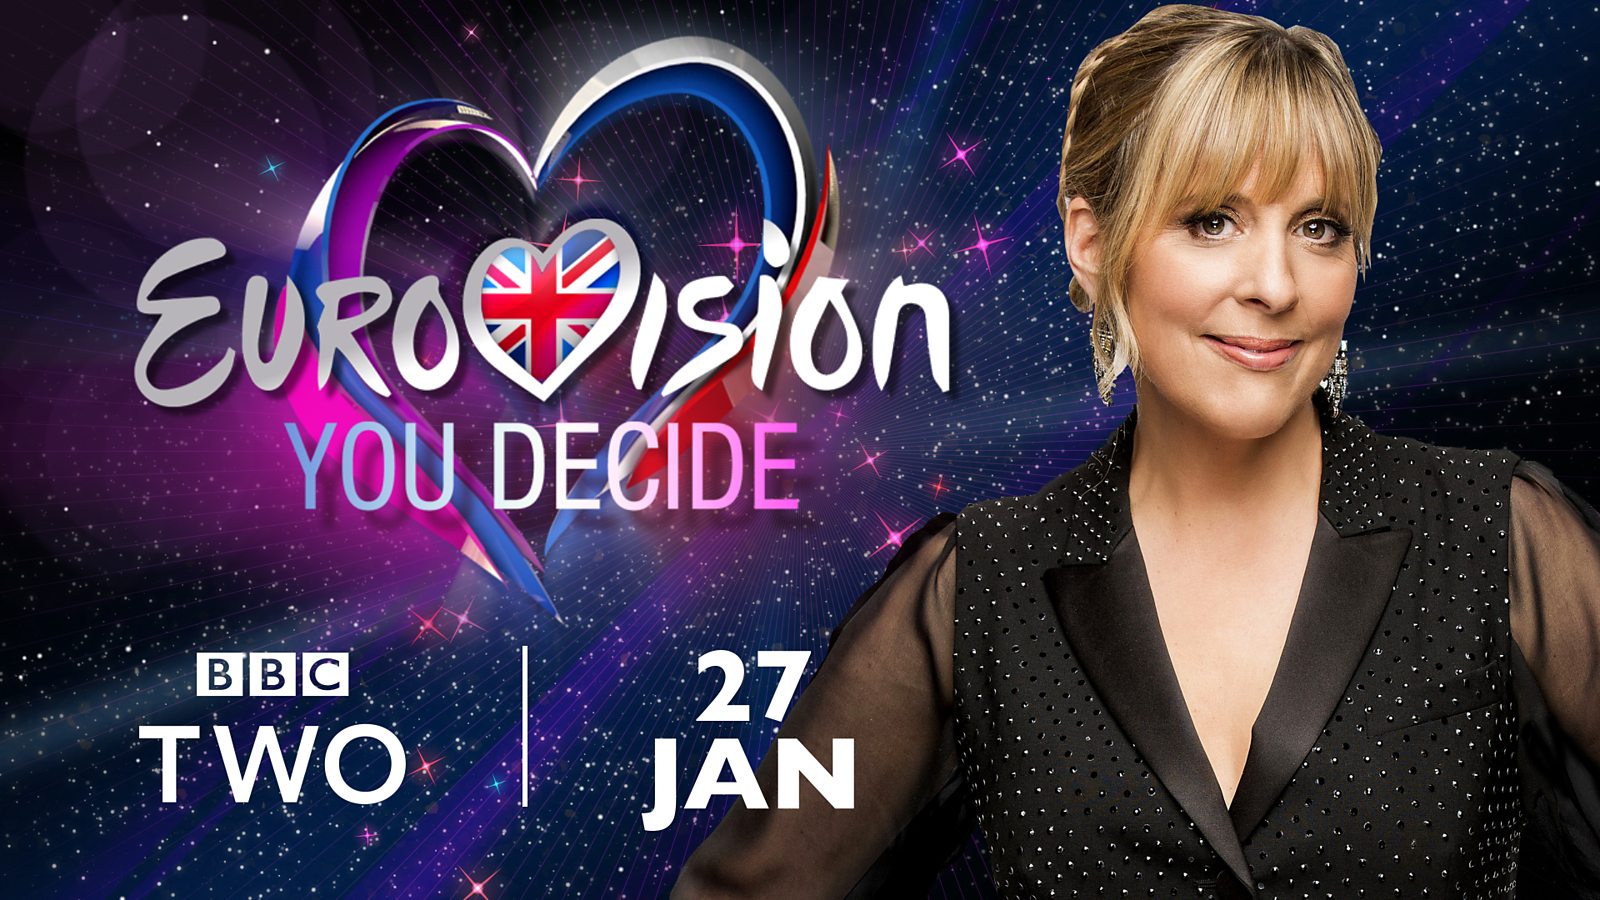 United Kingdom: Artists and songs revealed for “Eurovision: You Decide”